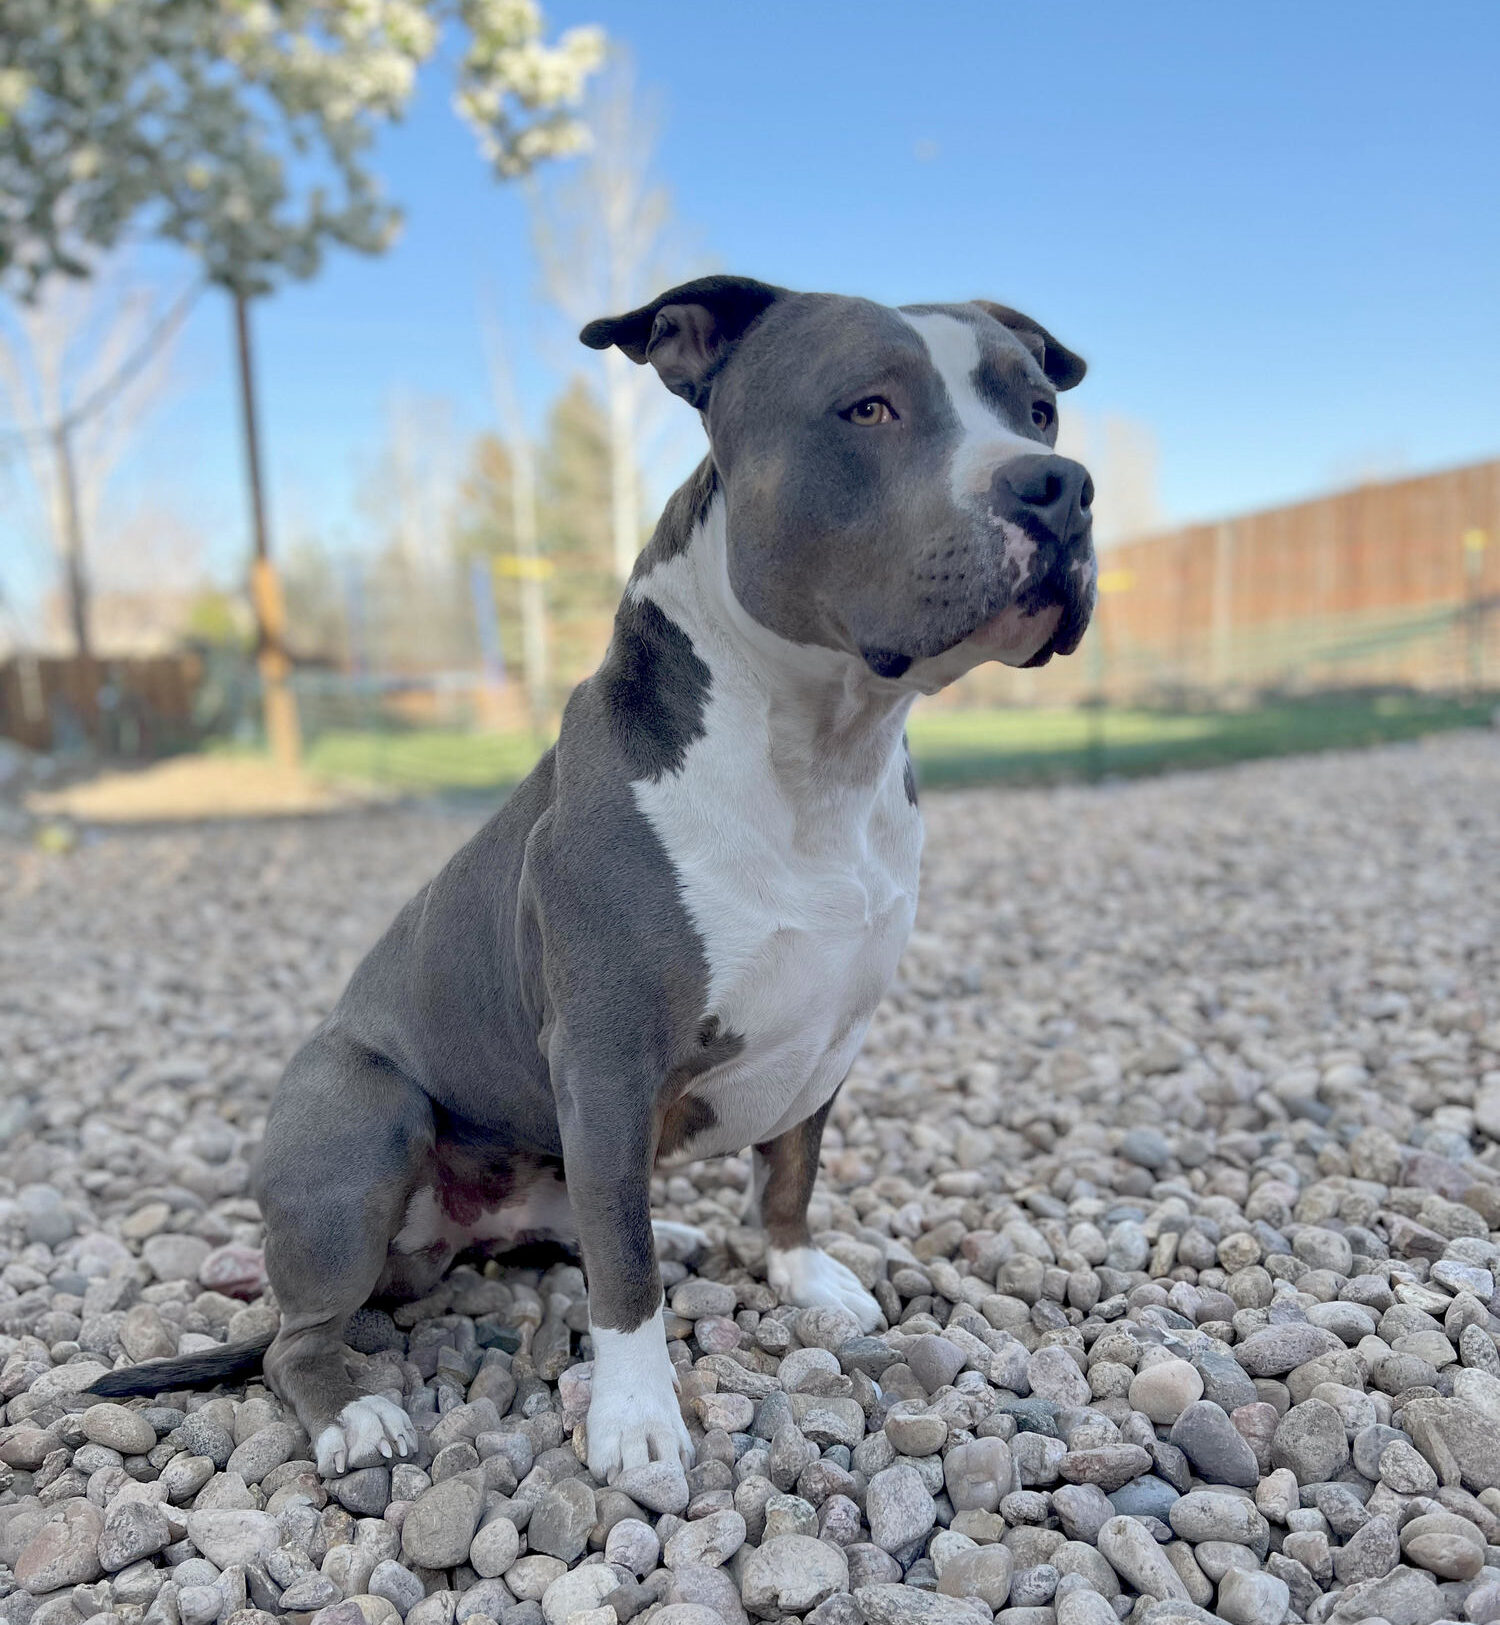 A gray and white pitbull-type dog sits outside looking off to the right.